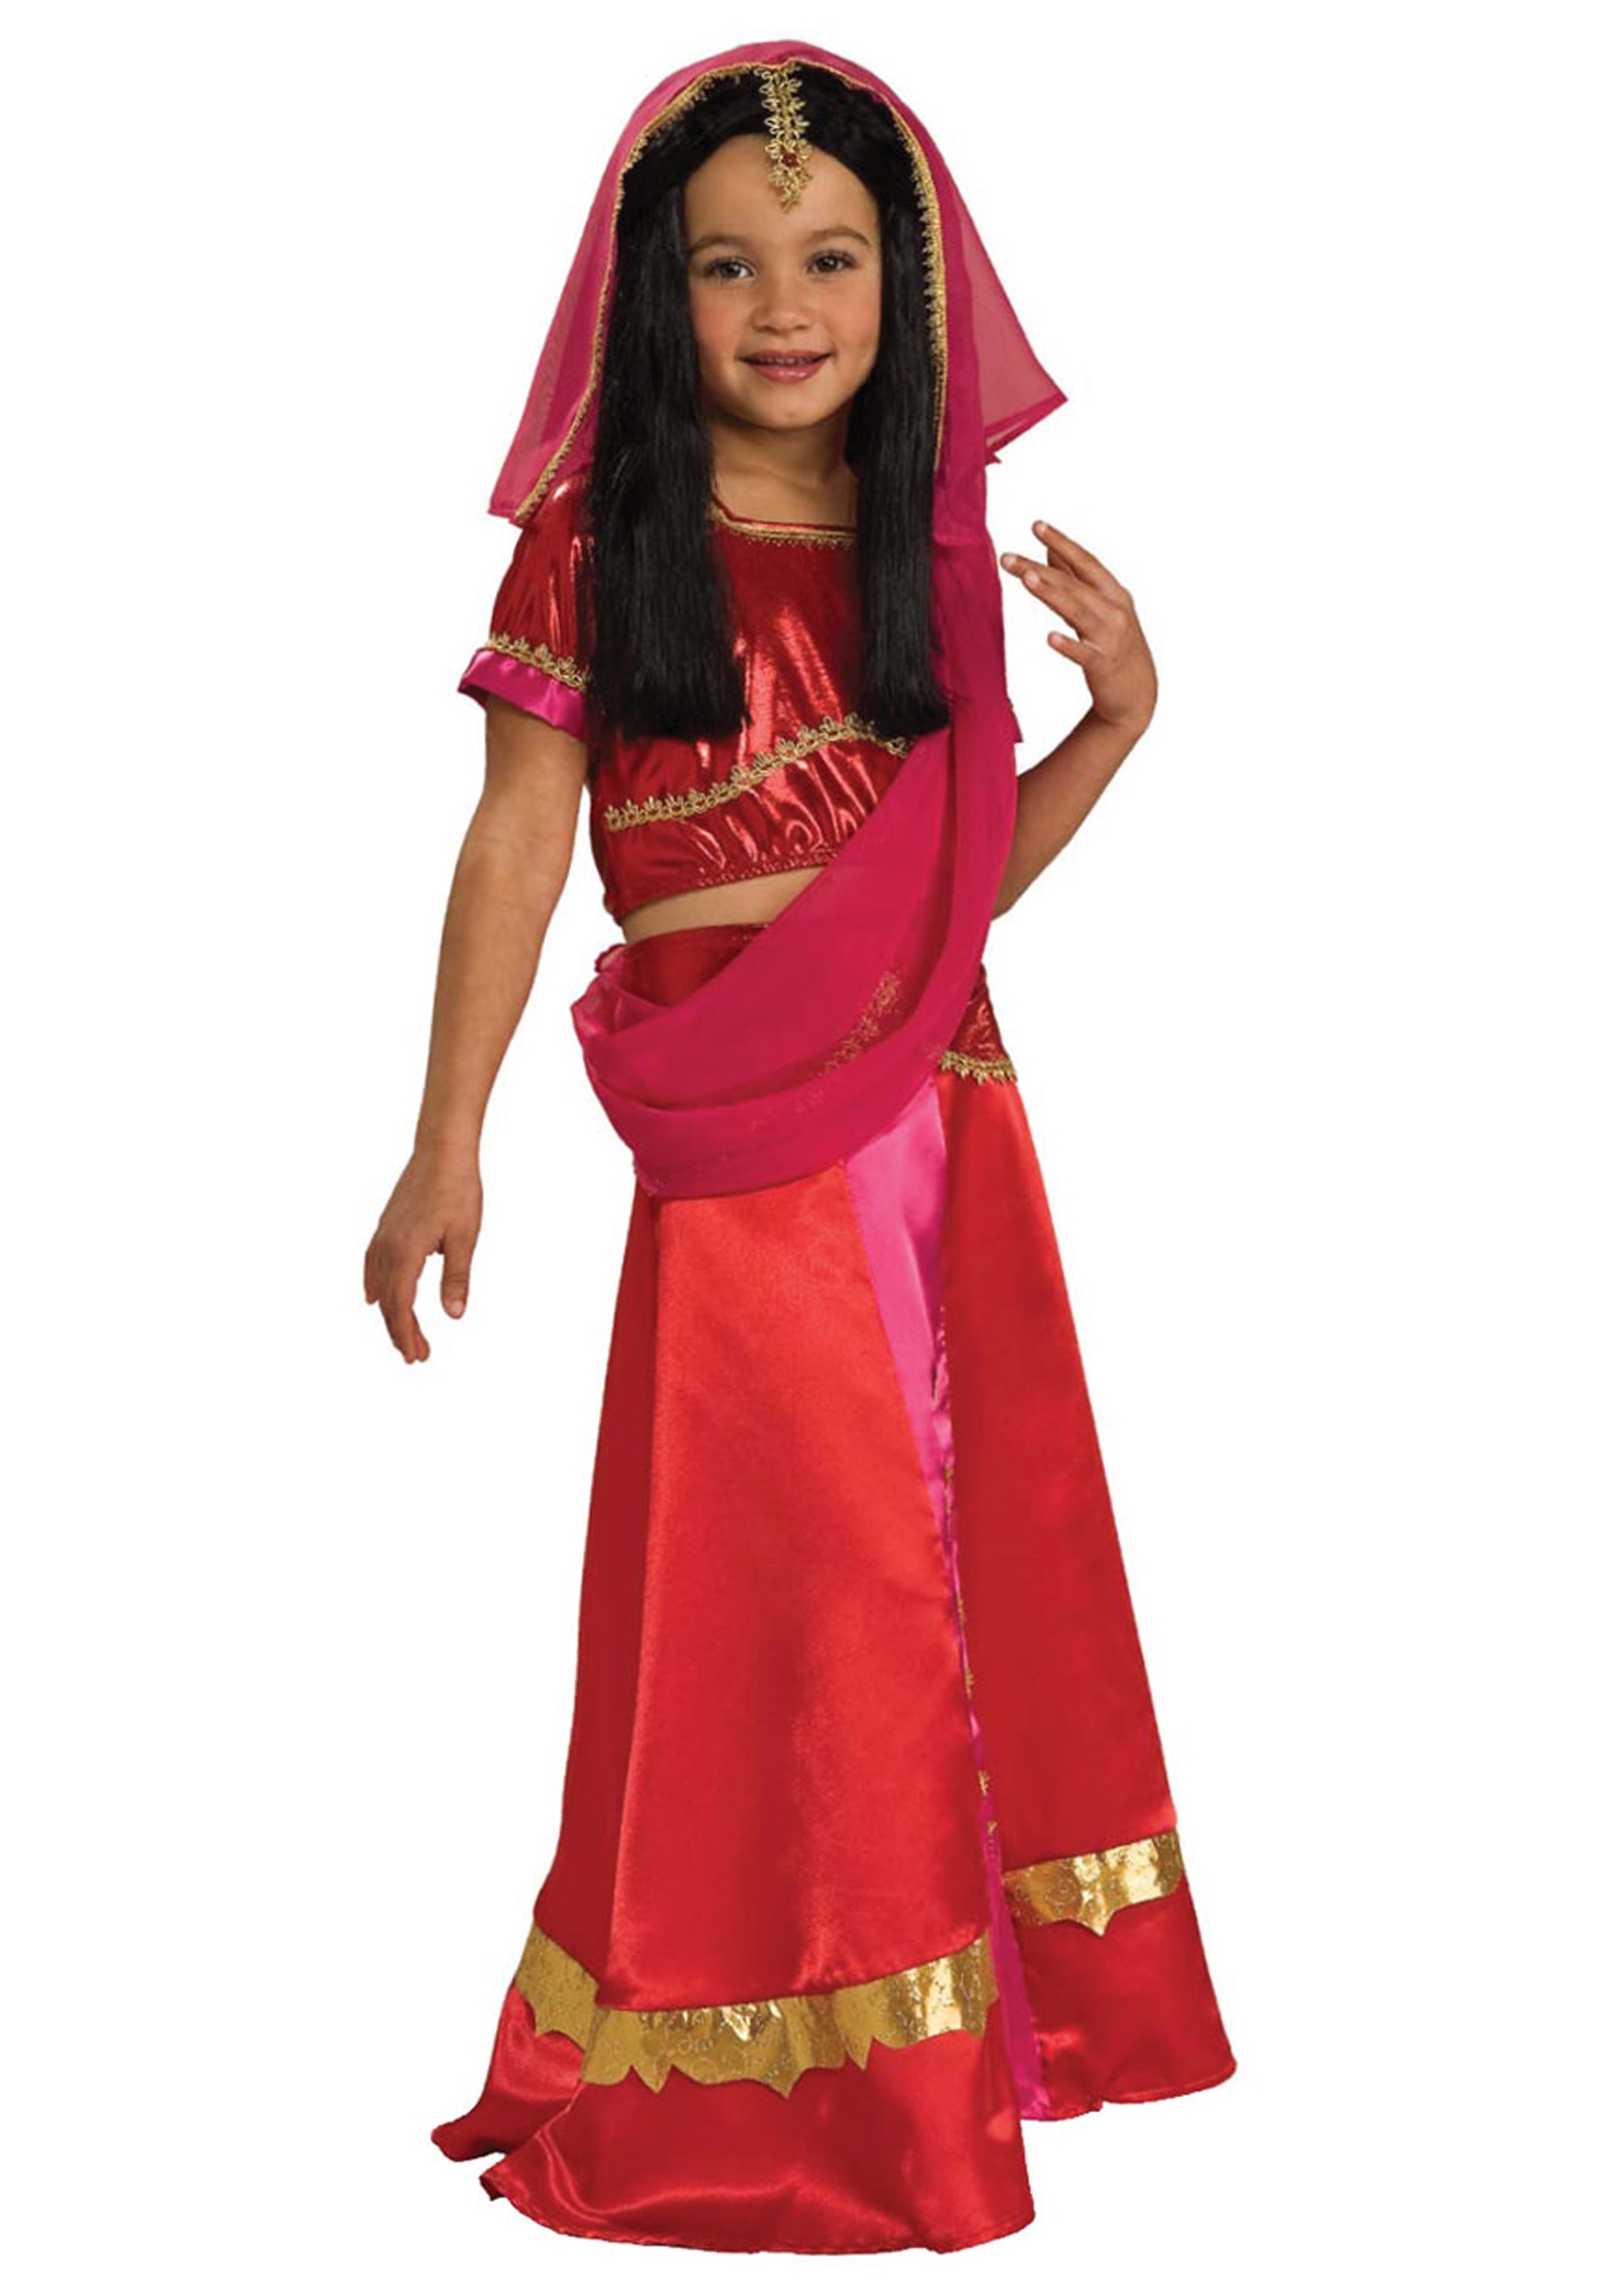 This costume has everything your kids needs to become an Indian movie star....